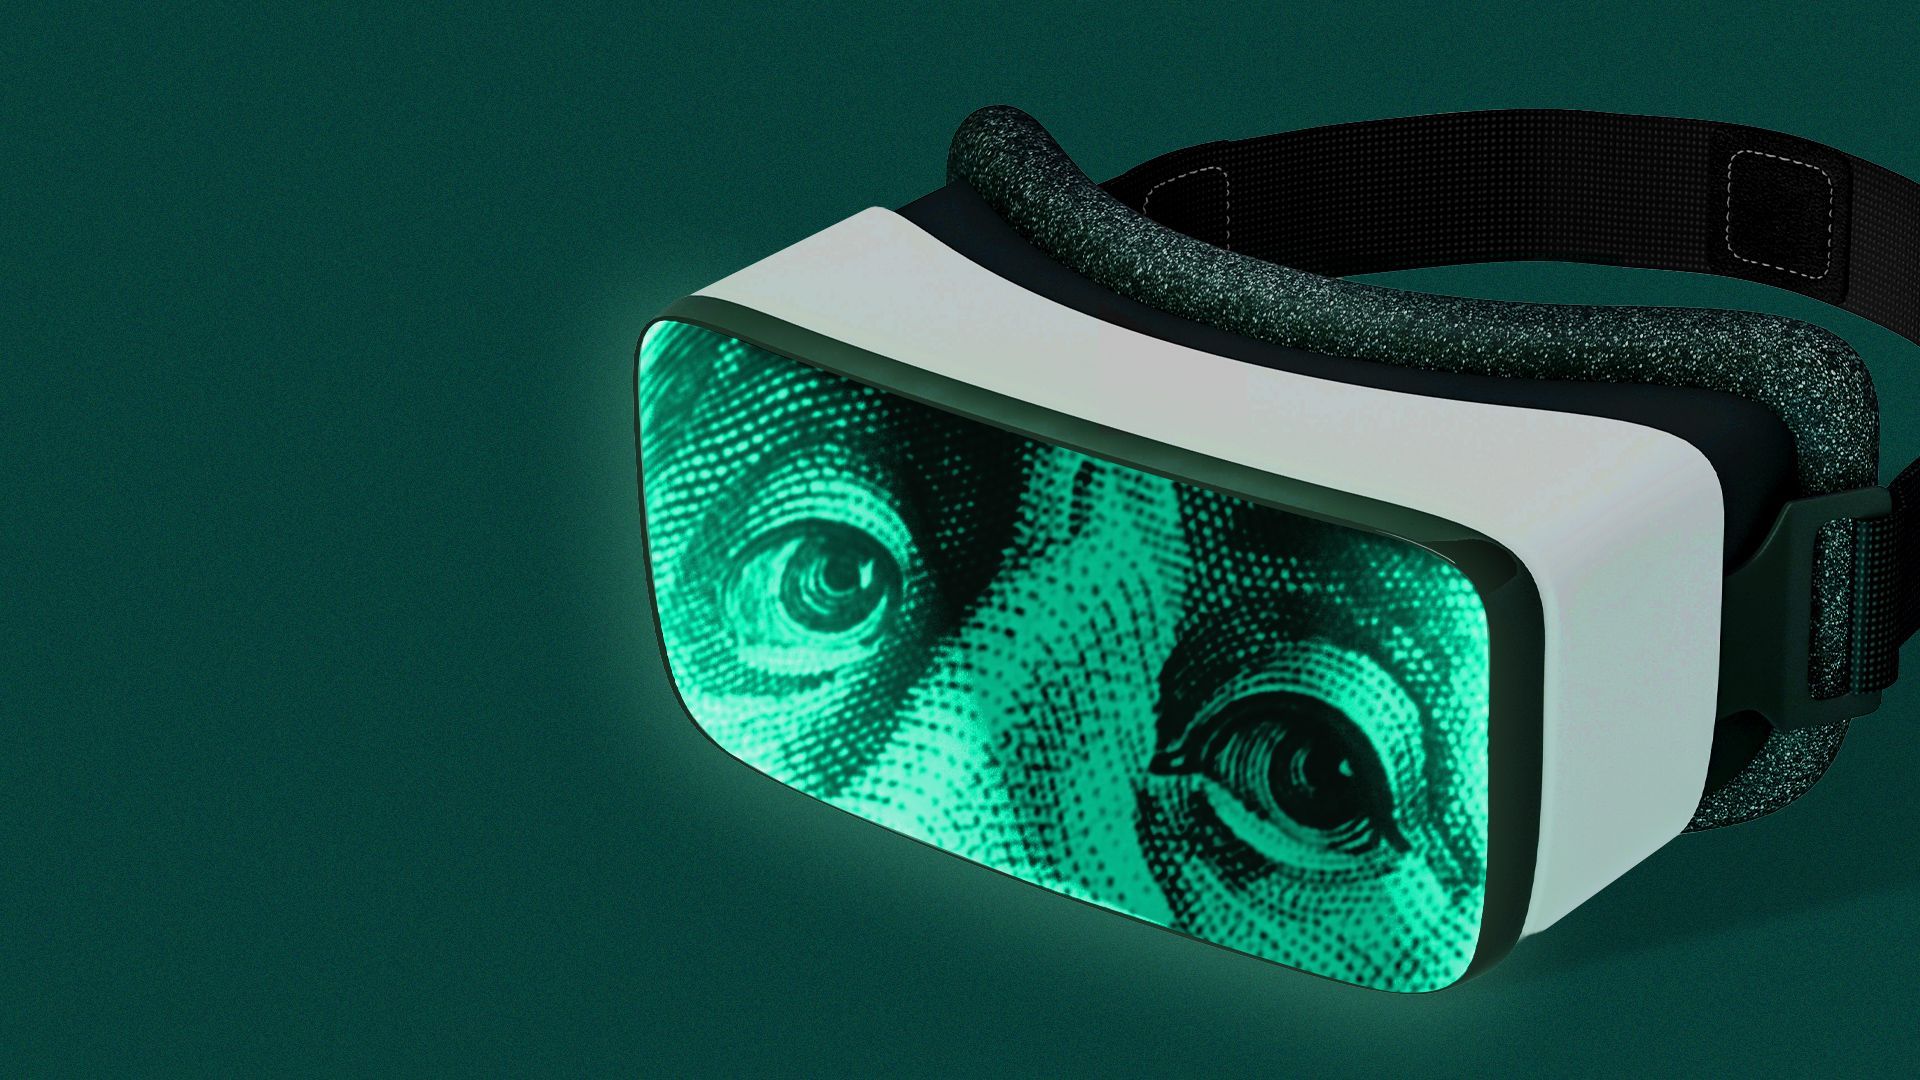 Illustration of a VR headset with Benjamin Franklin's eyes glowing in the lens.